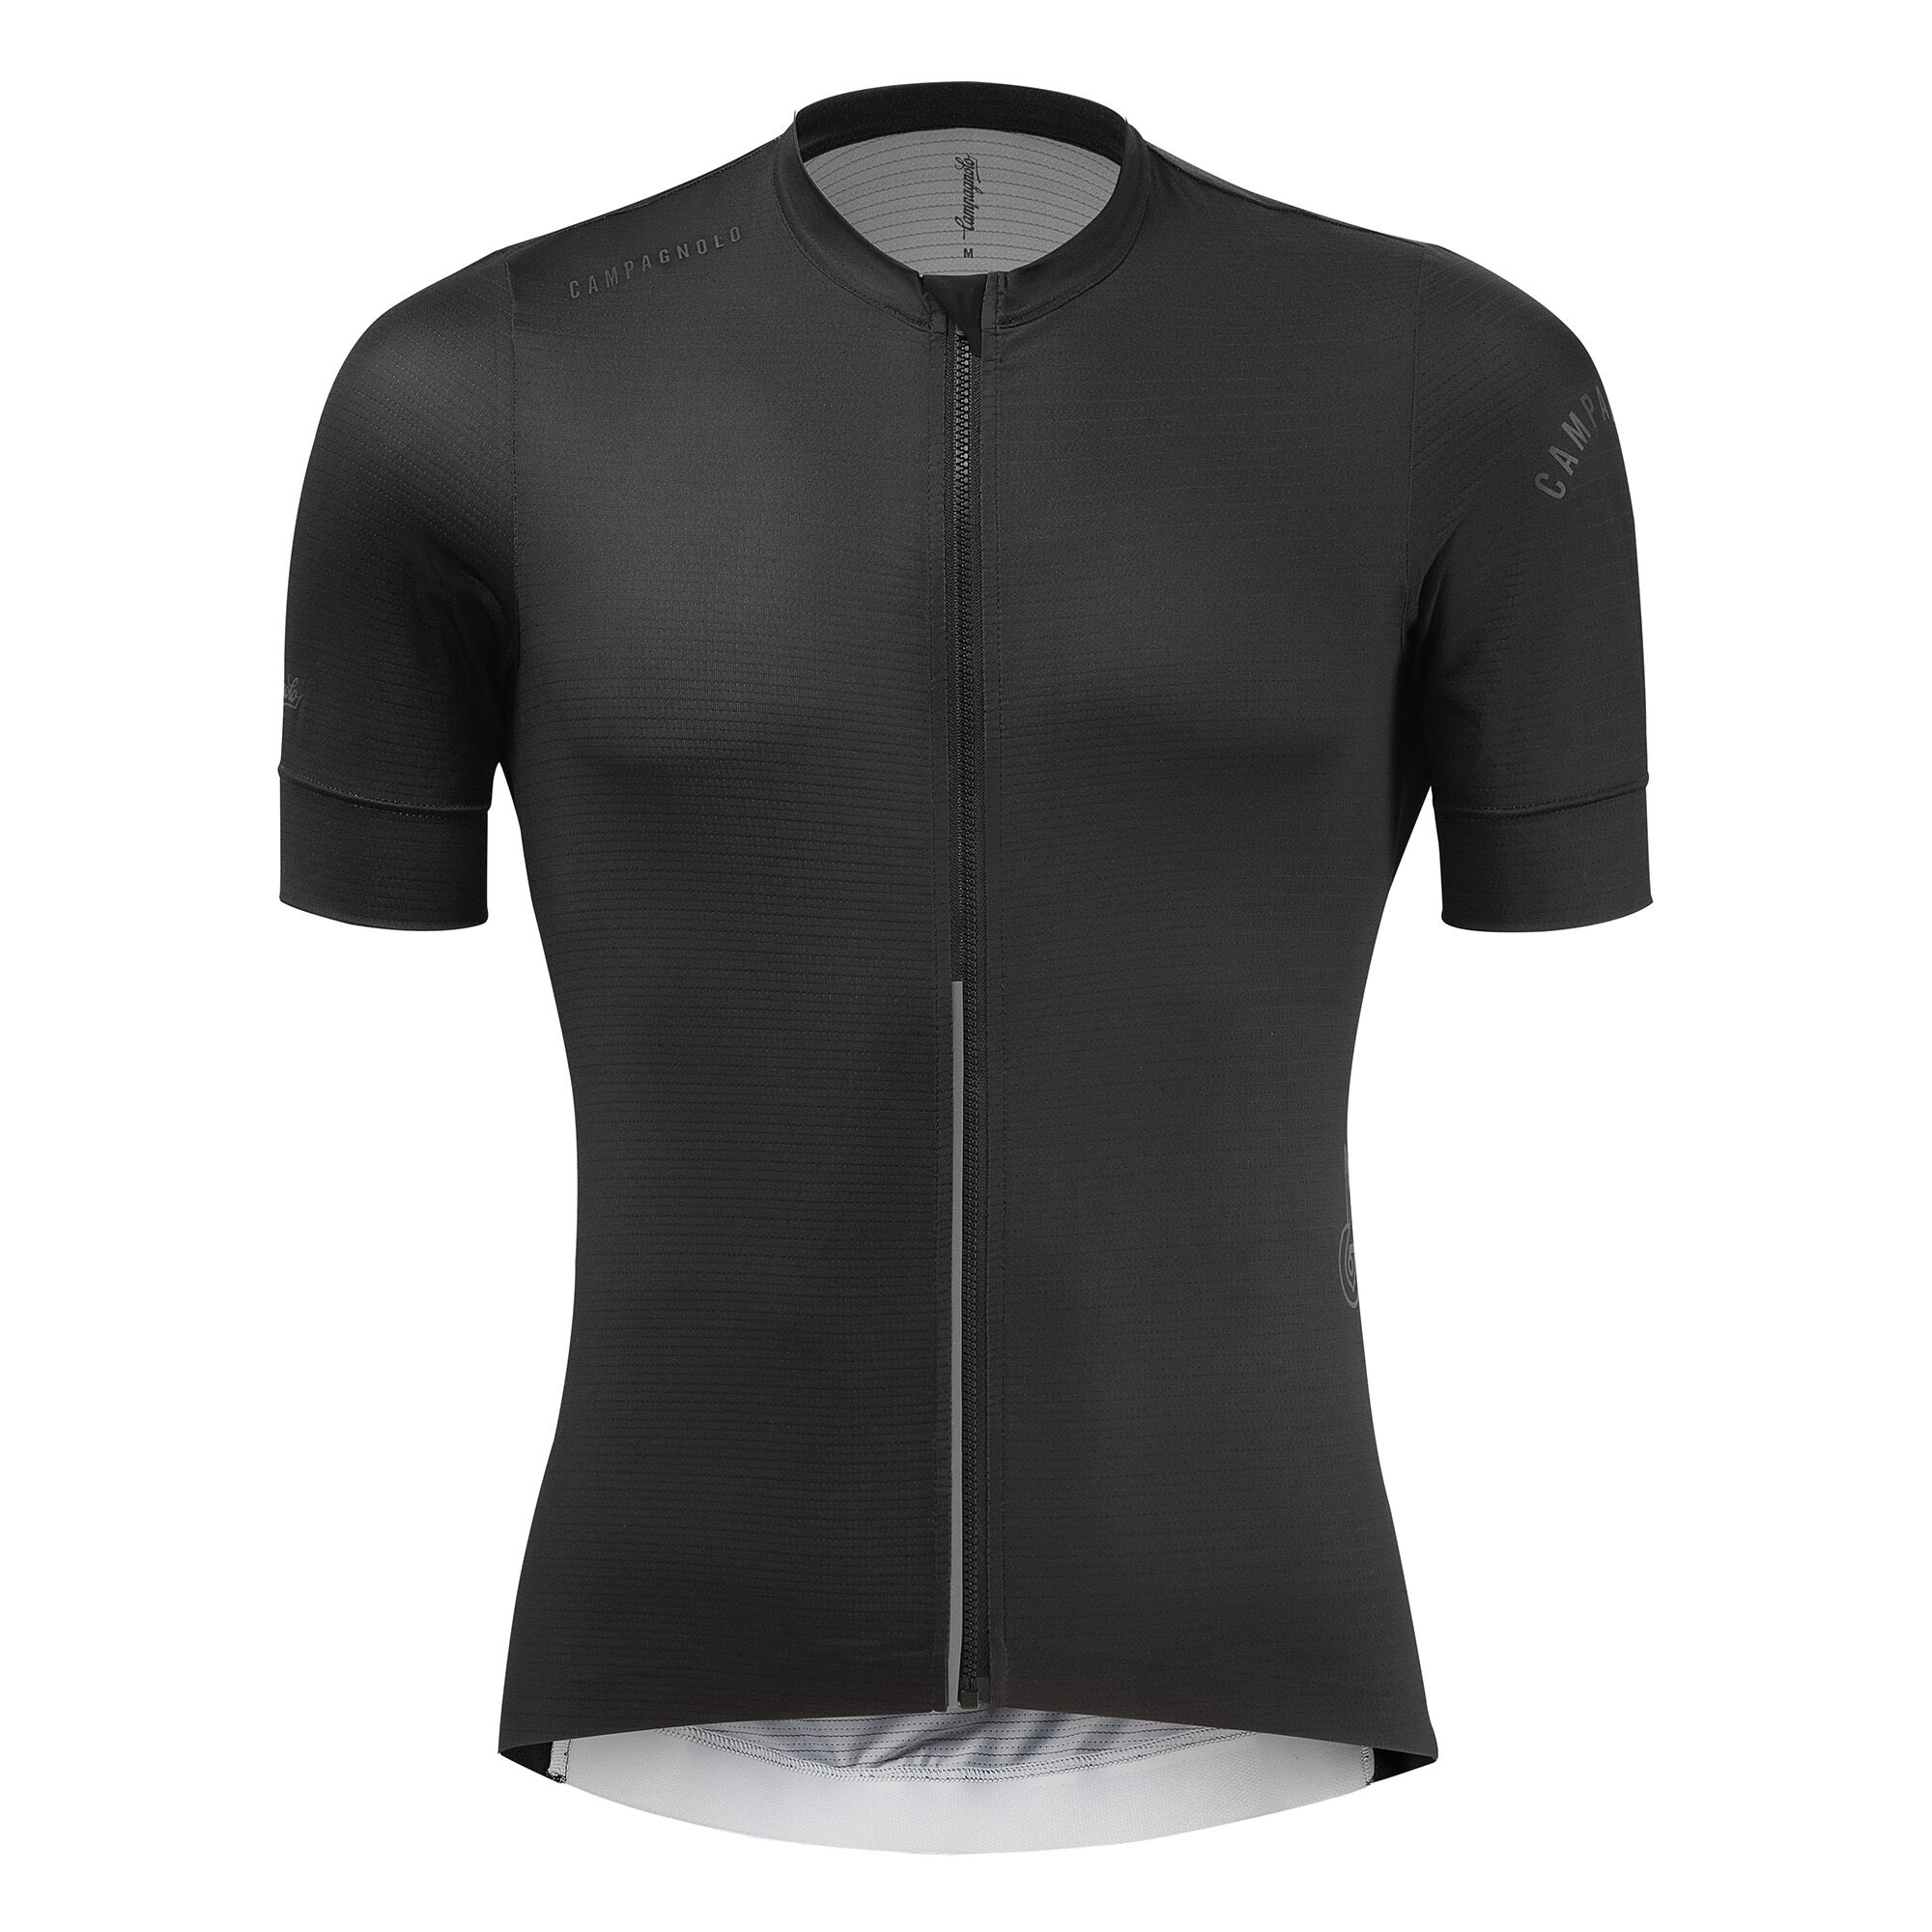 Road cycling clothing women | Campagnolo